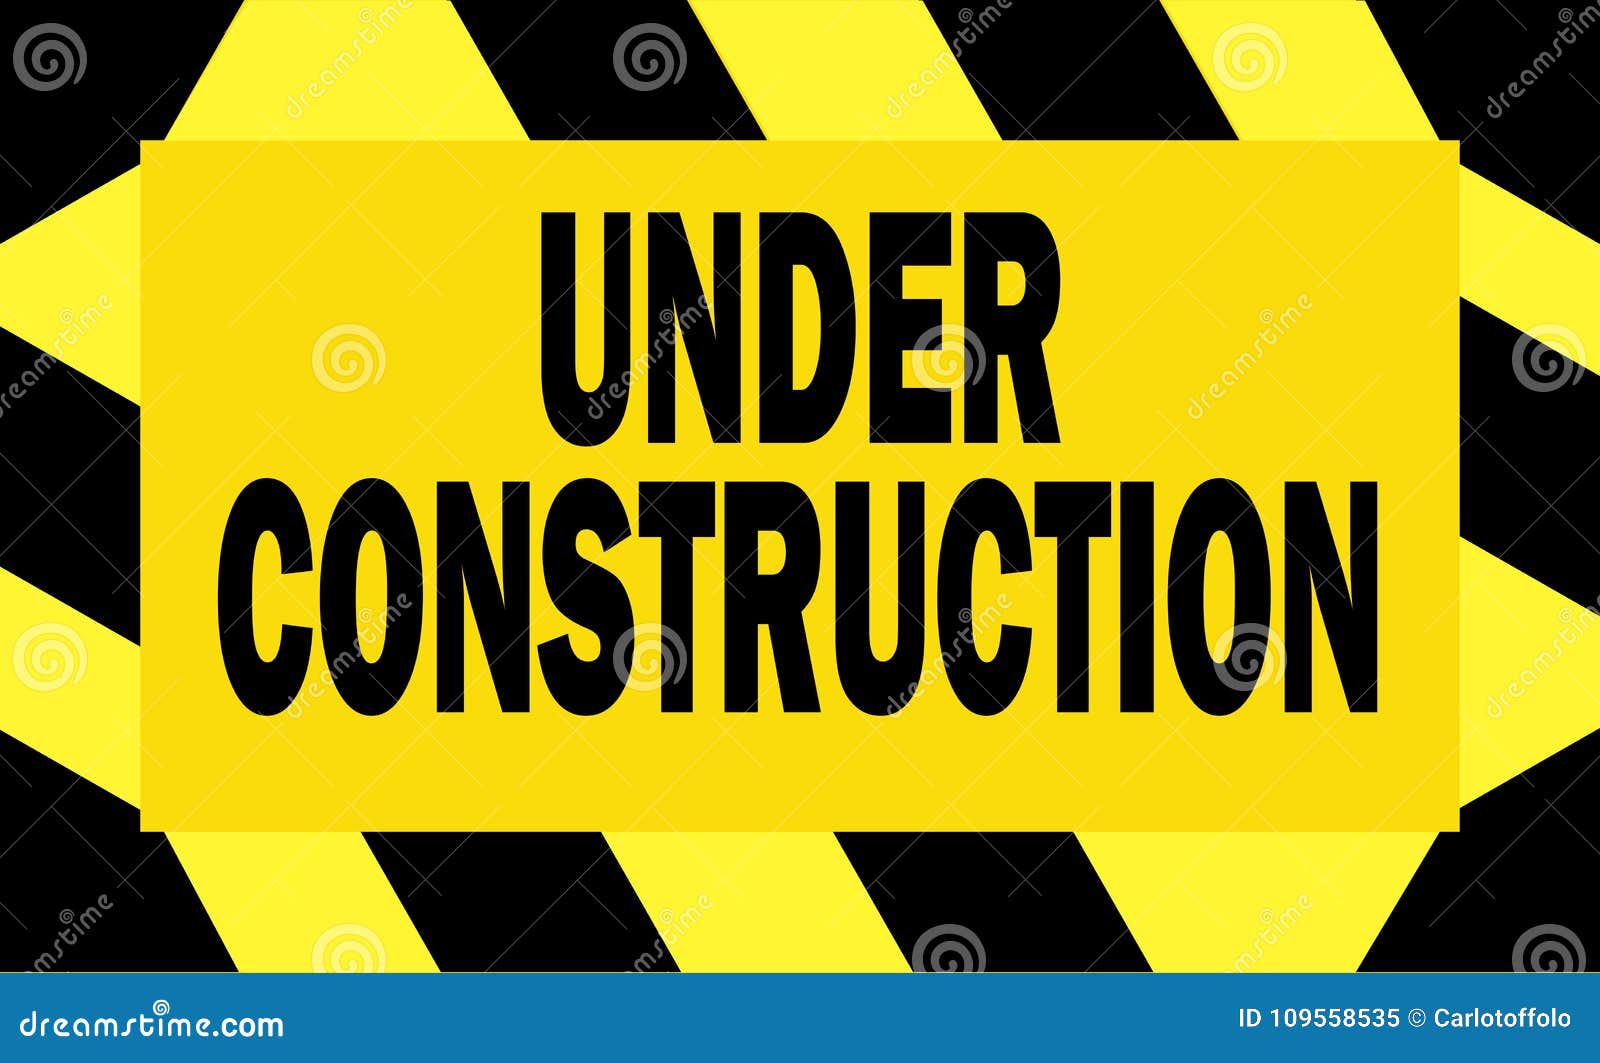 Under Construction - Black And Yellow Sign - Vector Stock Vector ...